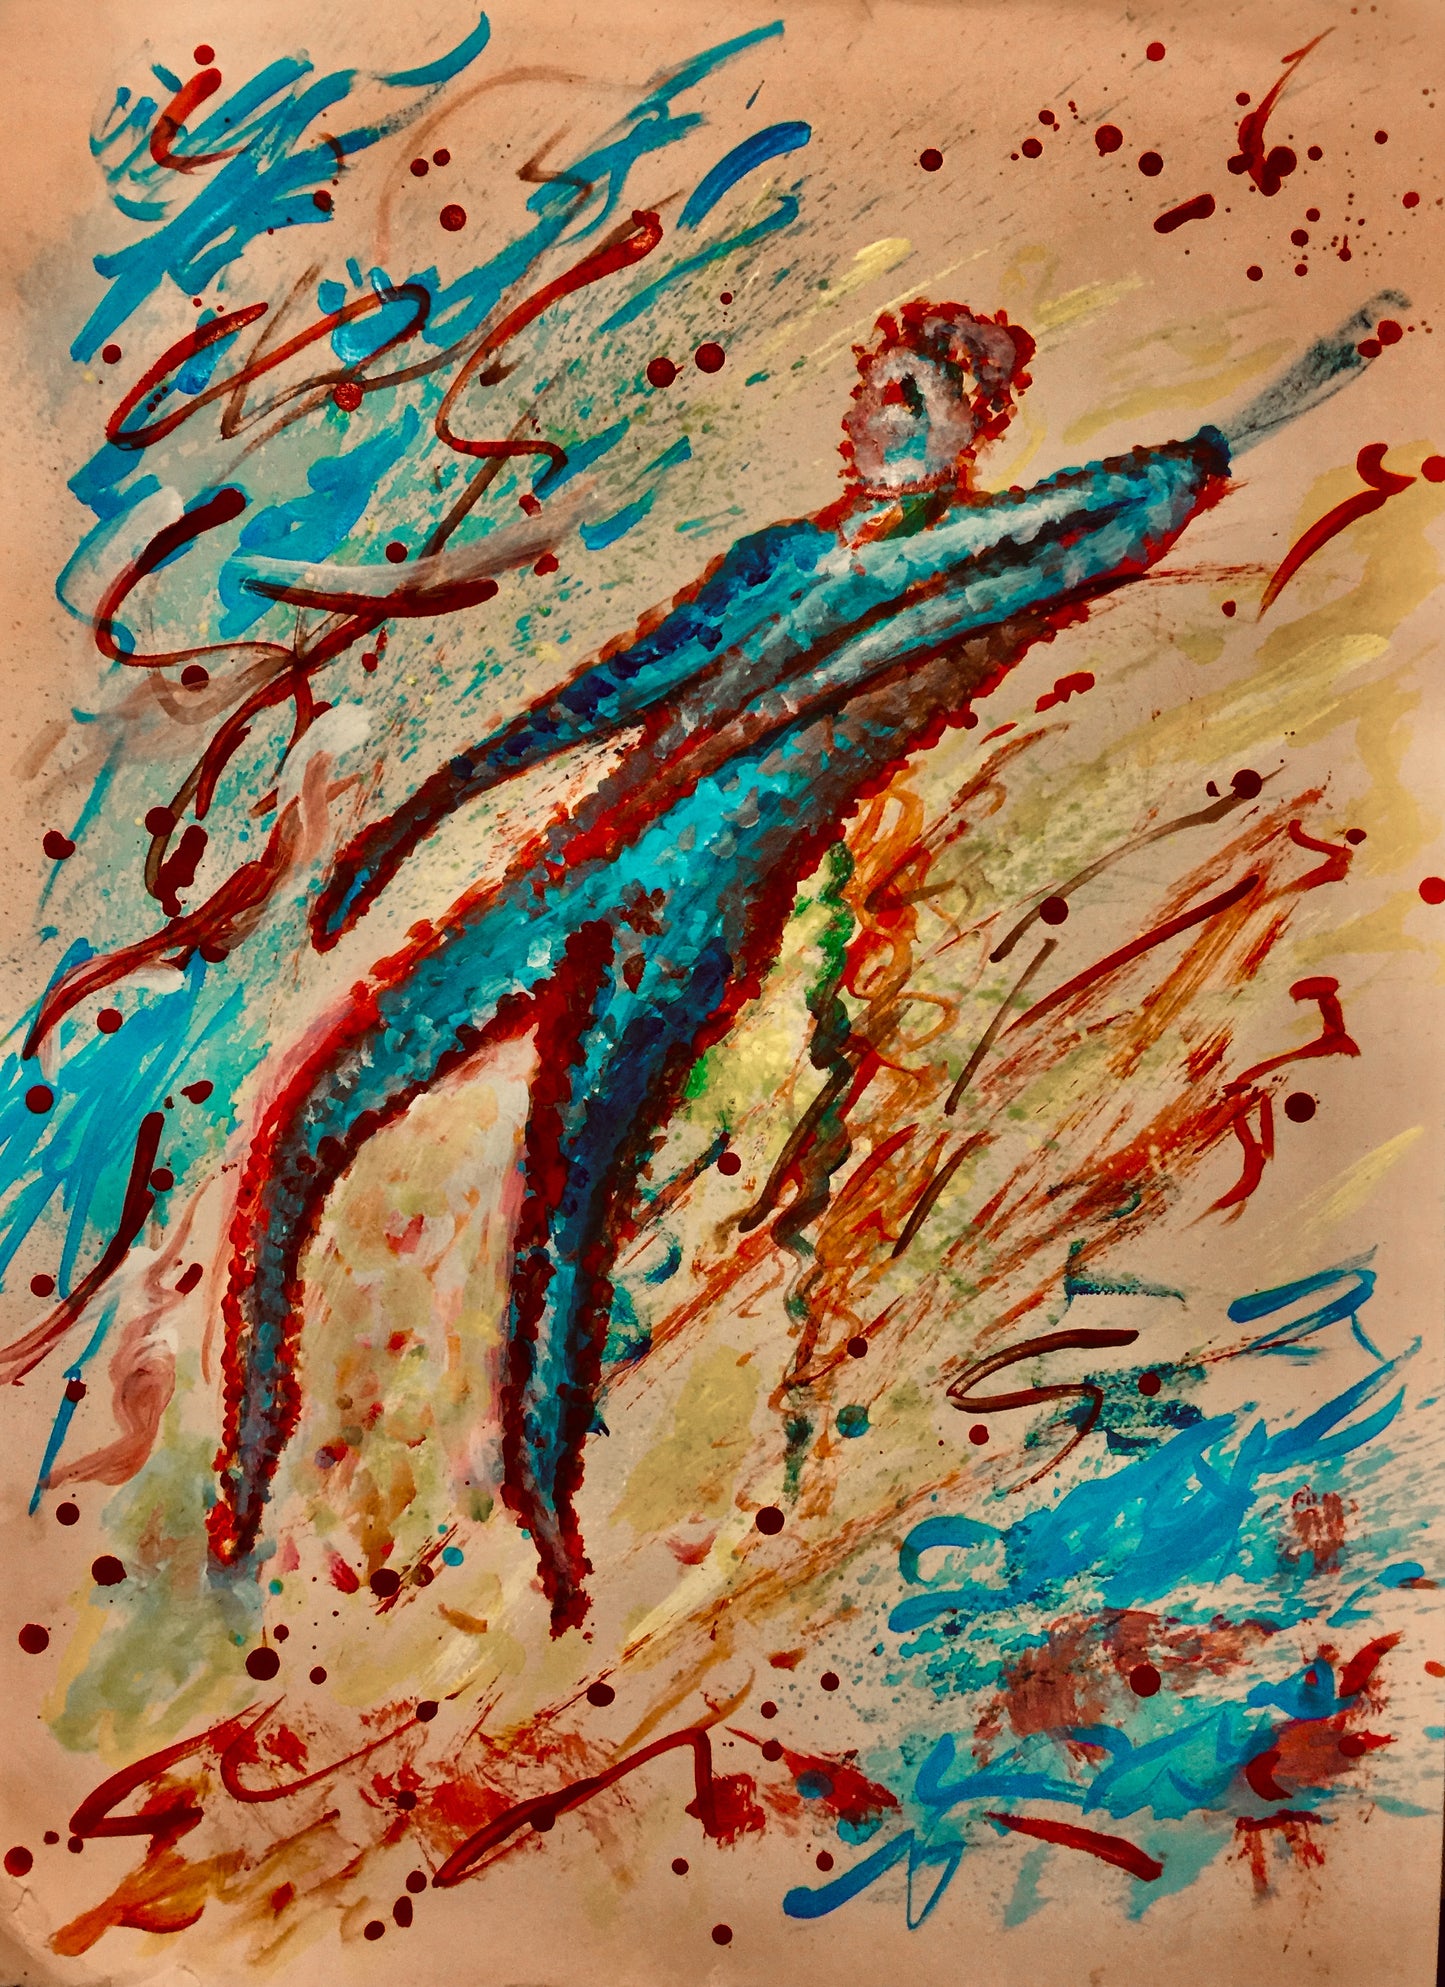 Shake it to the Right and then shake it to the left ❤️😃. It is a joyful and happy painting characterized by its colors and gestures. It moves with you as you move around the room.  This painting is an Original Acrylic on Paper by Shahla Rahimi  Reynolds. Shake Your Body Baby, Shake It is 28 1/2” H X 20 1/4” W..